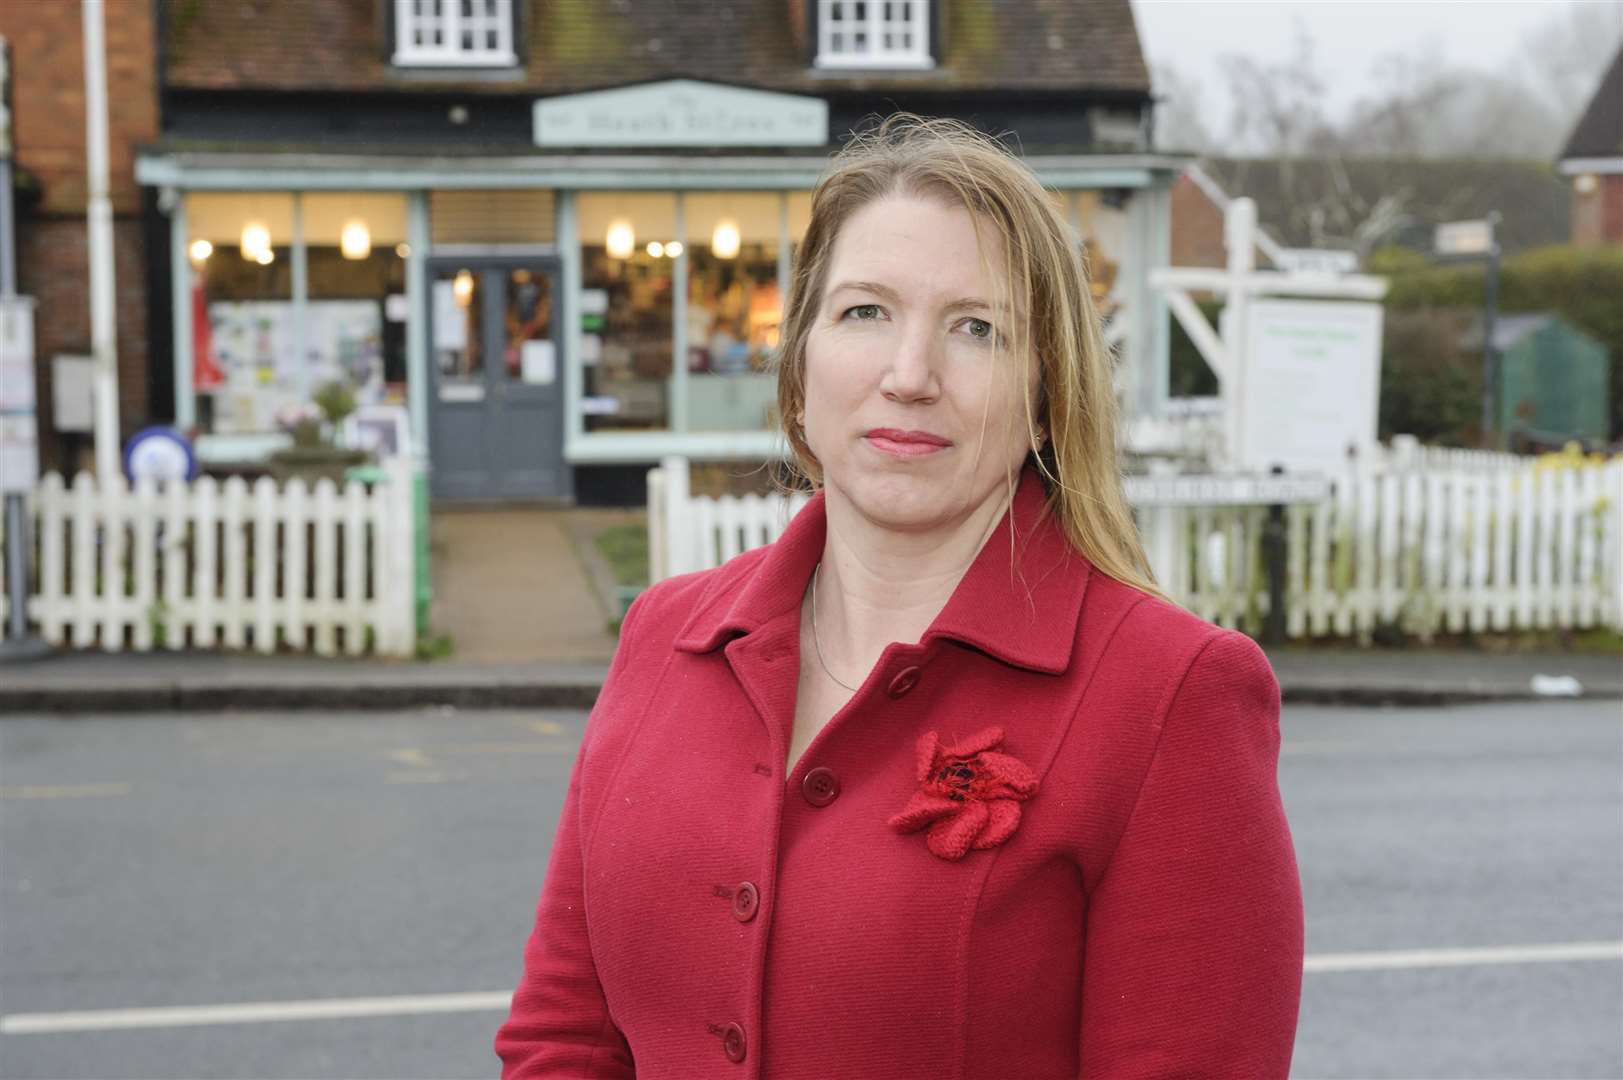 Kate Mills is concerned at the number of accidents occurring at the crossroads with Lamberhurst Road, alongside her shop